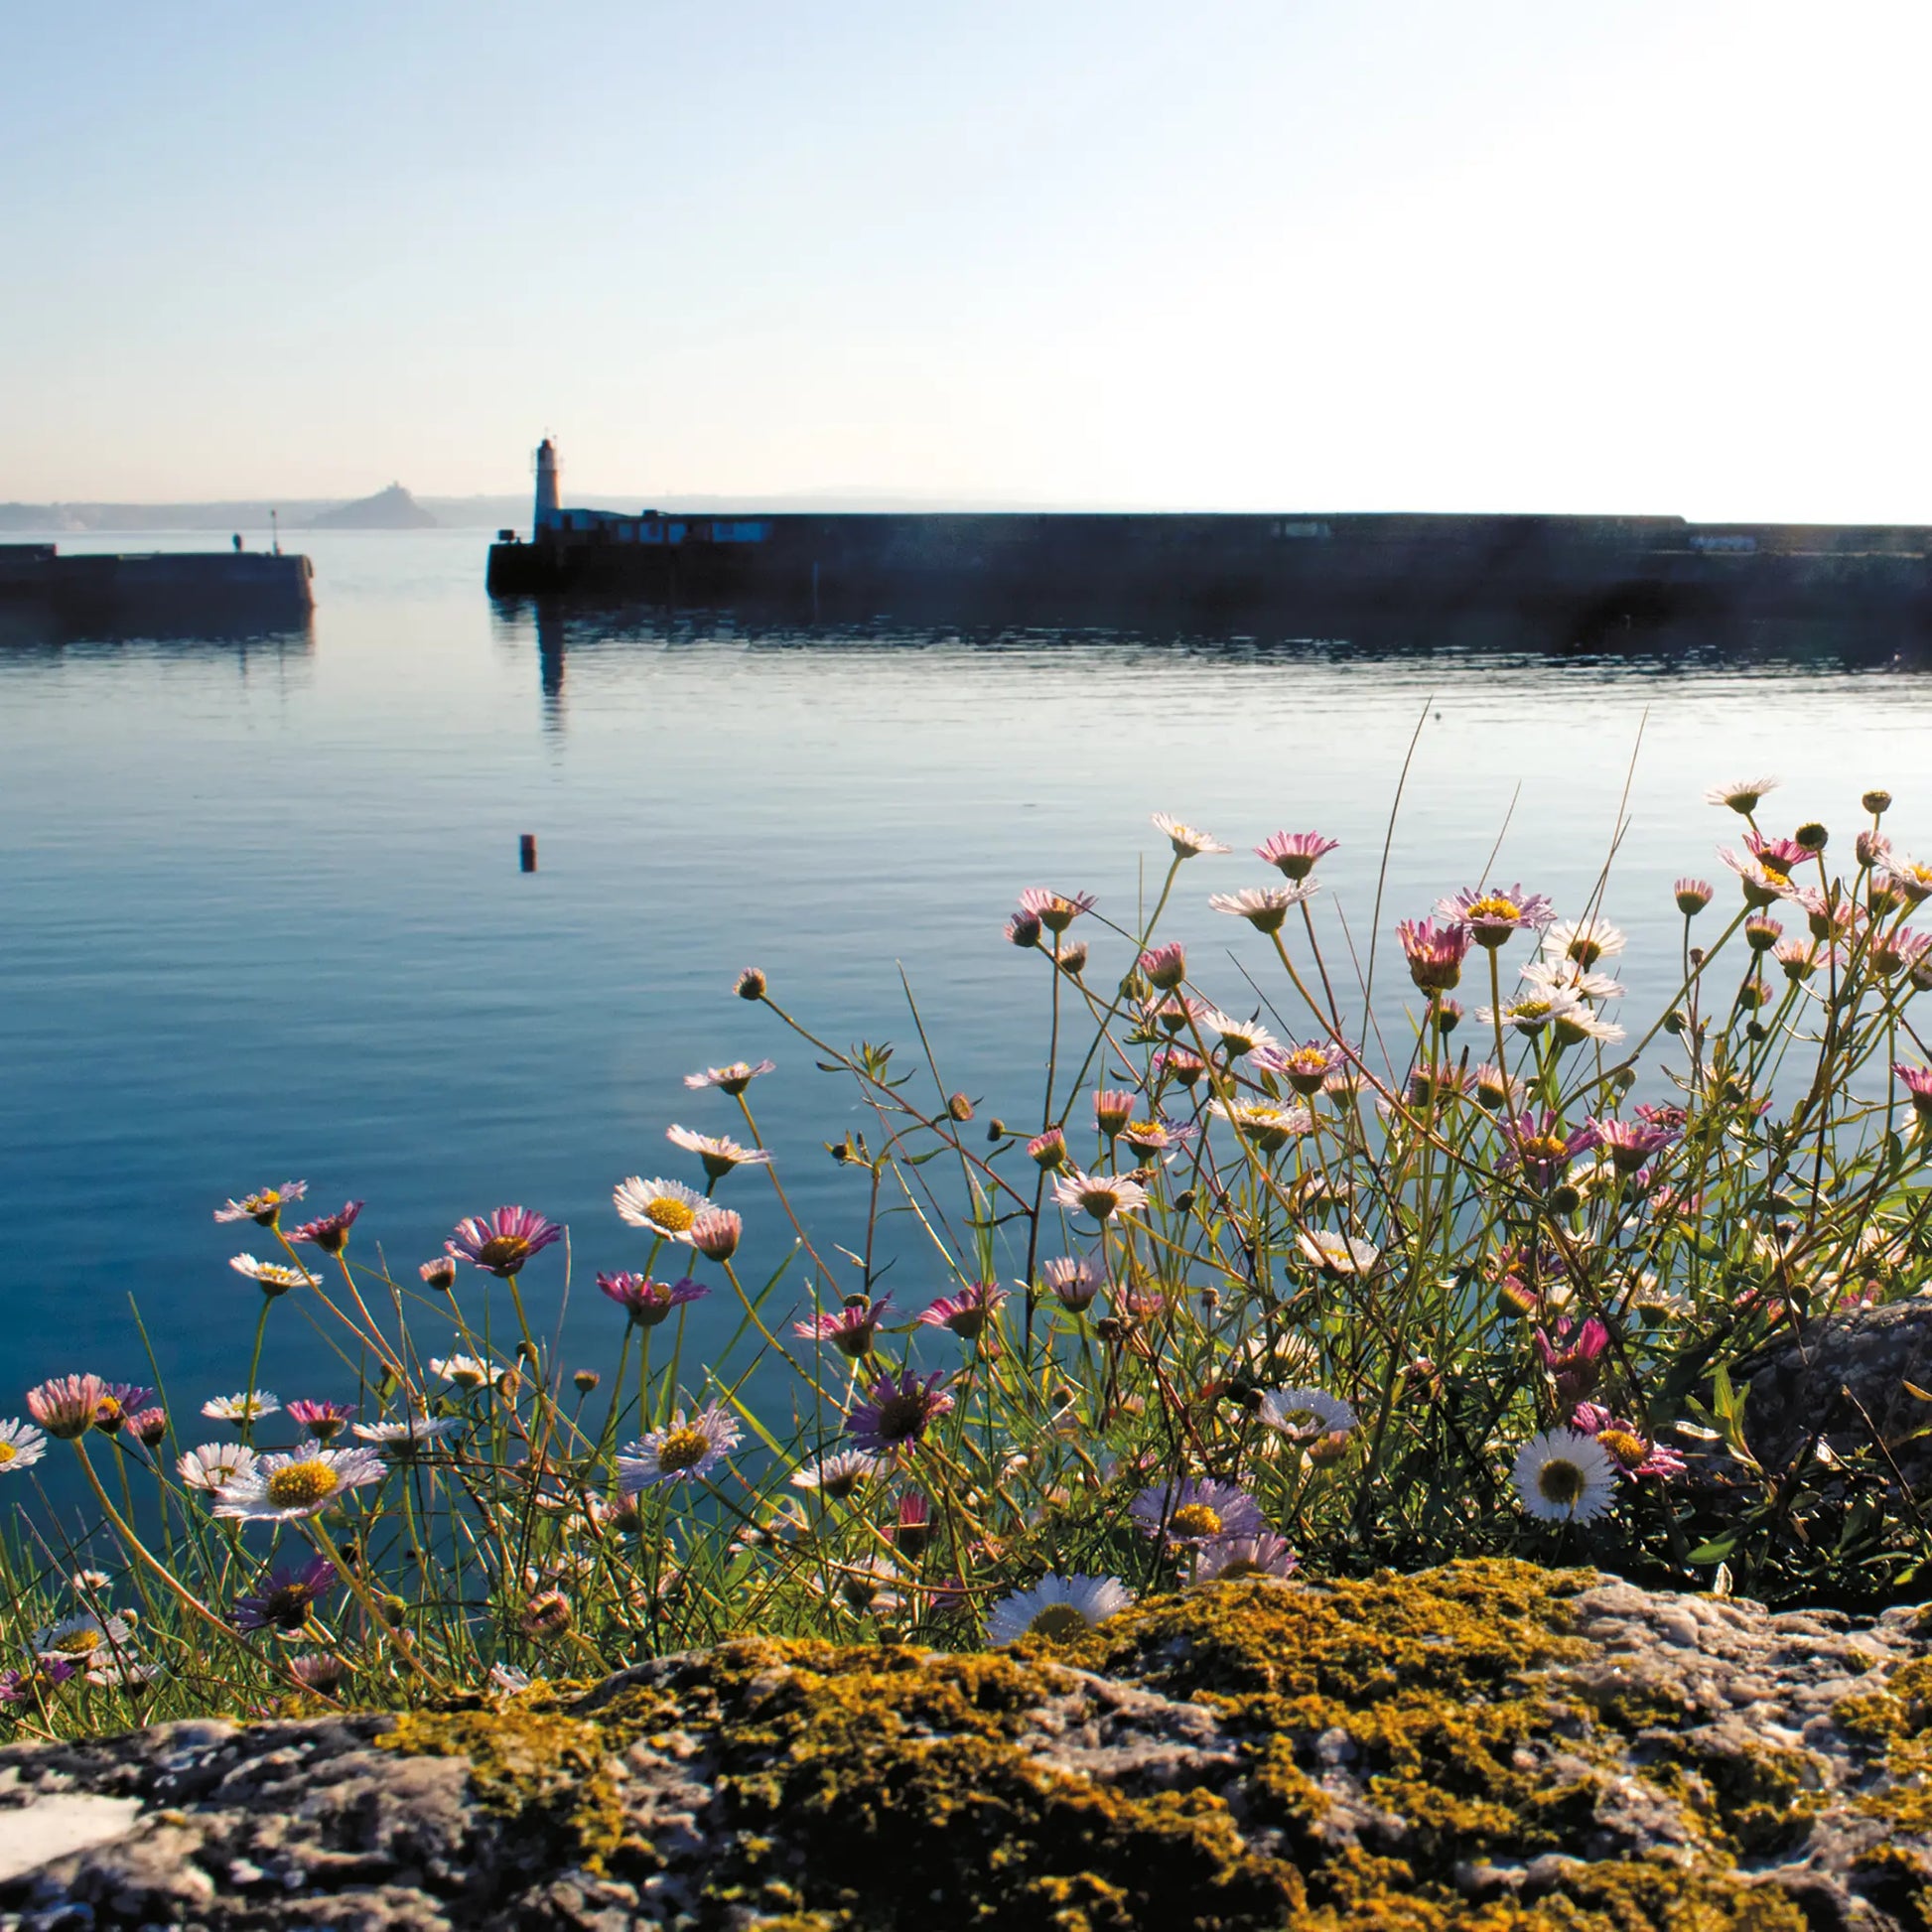 Cornish greetings card image of daisies in the morning sunlight on a granite wall at Newlyn Harbour, St Michael's Mount visible through the harbour entrance